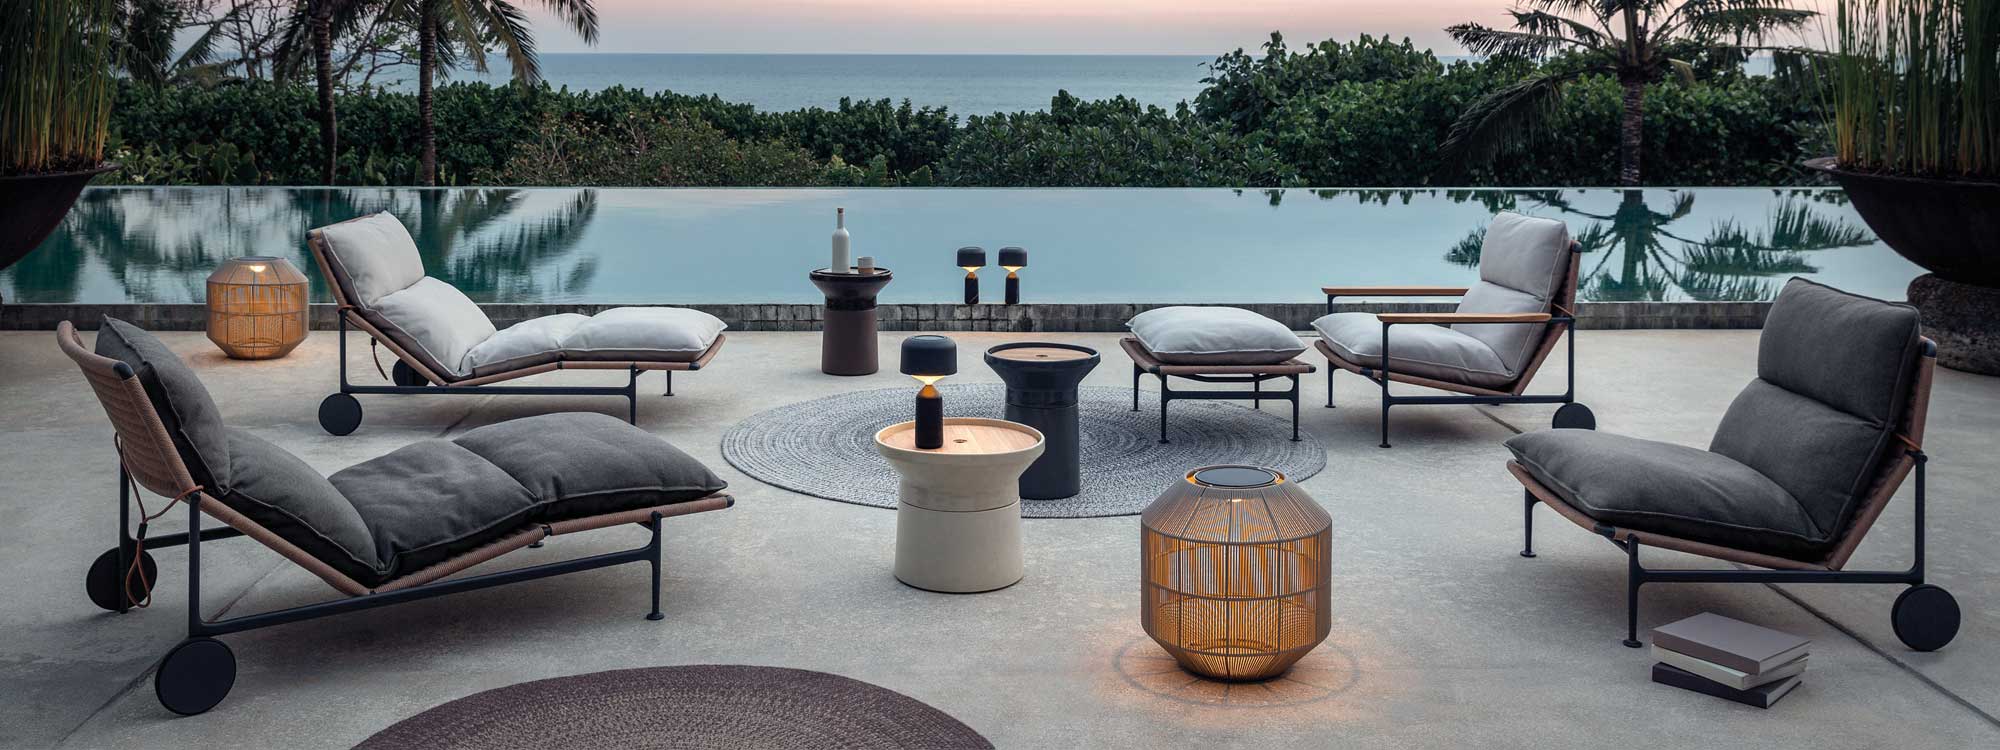 Image of Gloster Zenith modern outdoor lounge furniture and illuminated Basket lanterns around peaceful horizon swimming pool at dusk, with tropical woodland and sea in the background